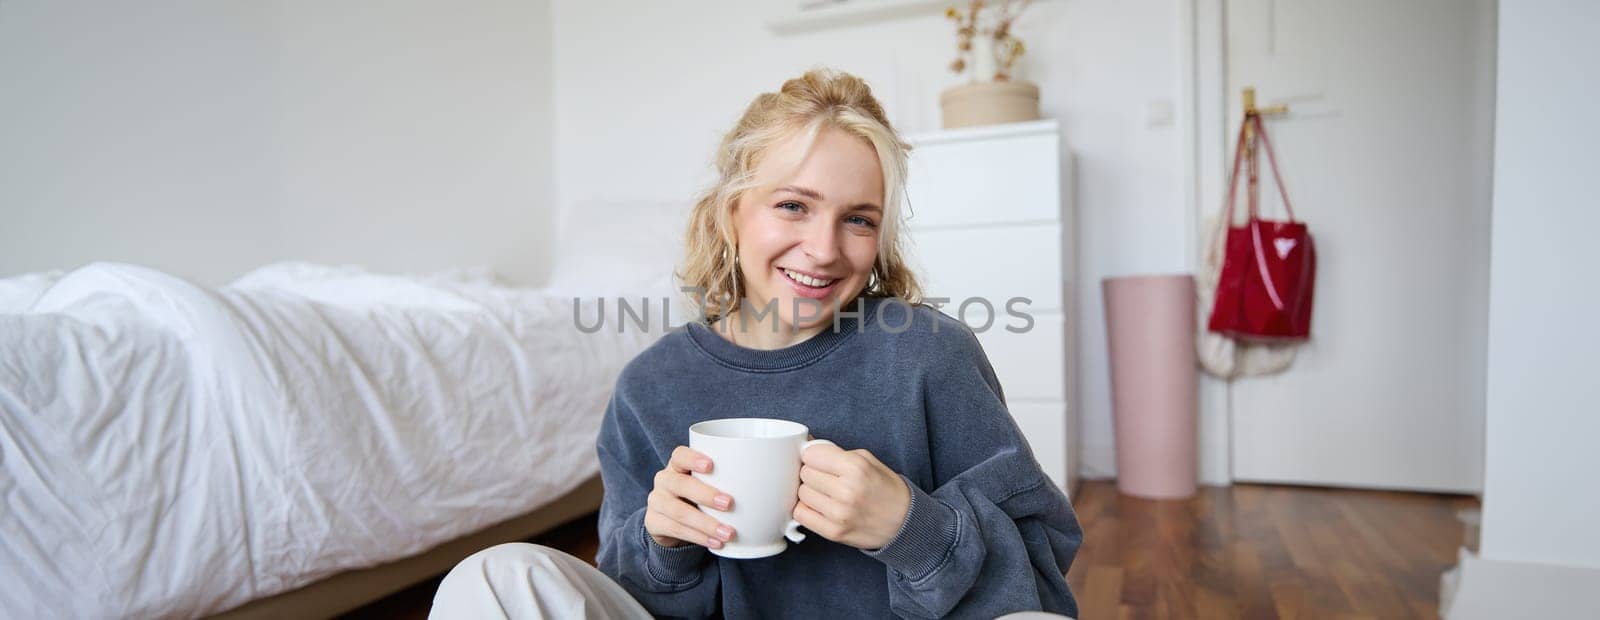 Portrait of young beautiful woman in casual clothes, sitting on bedroom floor with cup of tea, drinking and smiling, looking at camera, recording a lifestyle vlog.